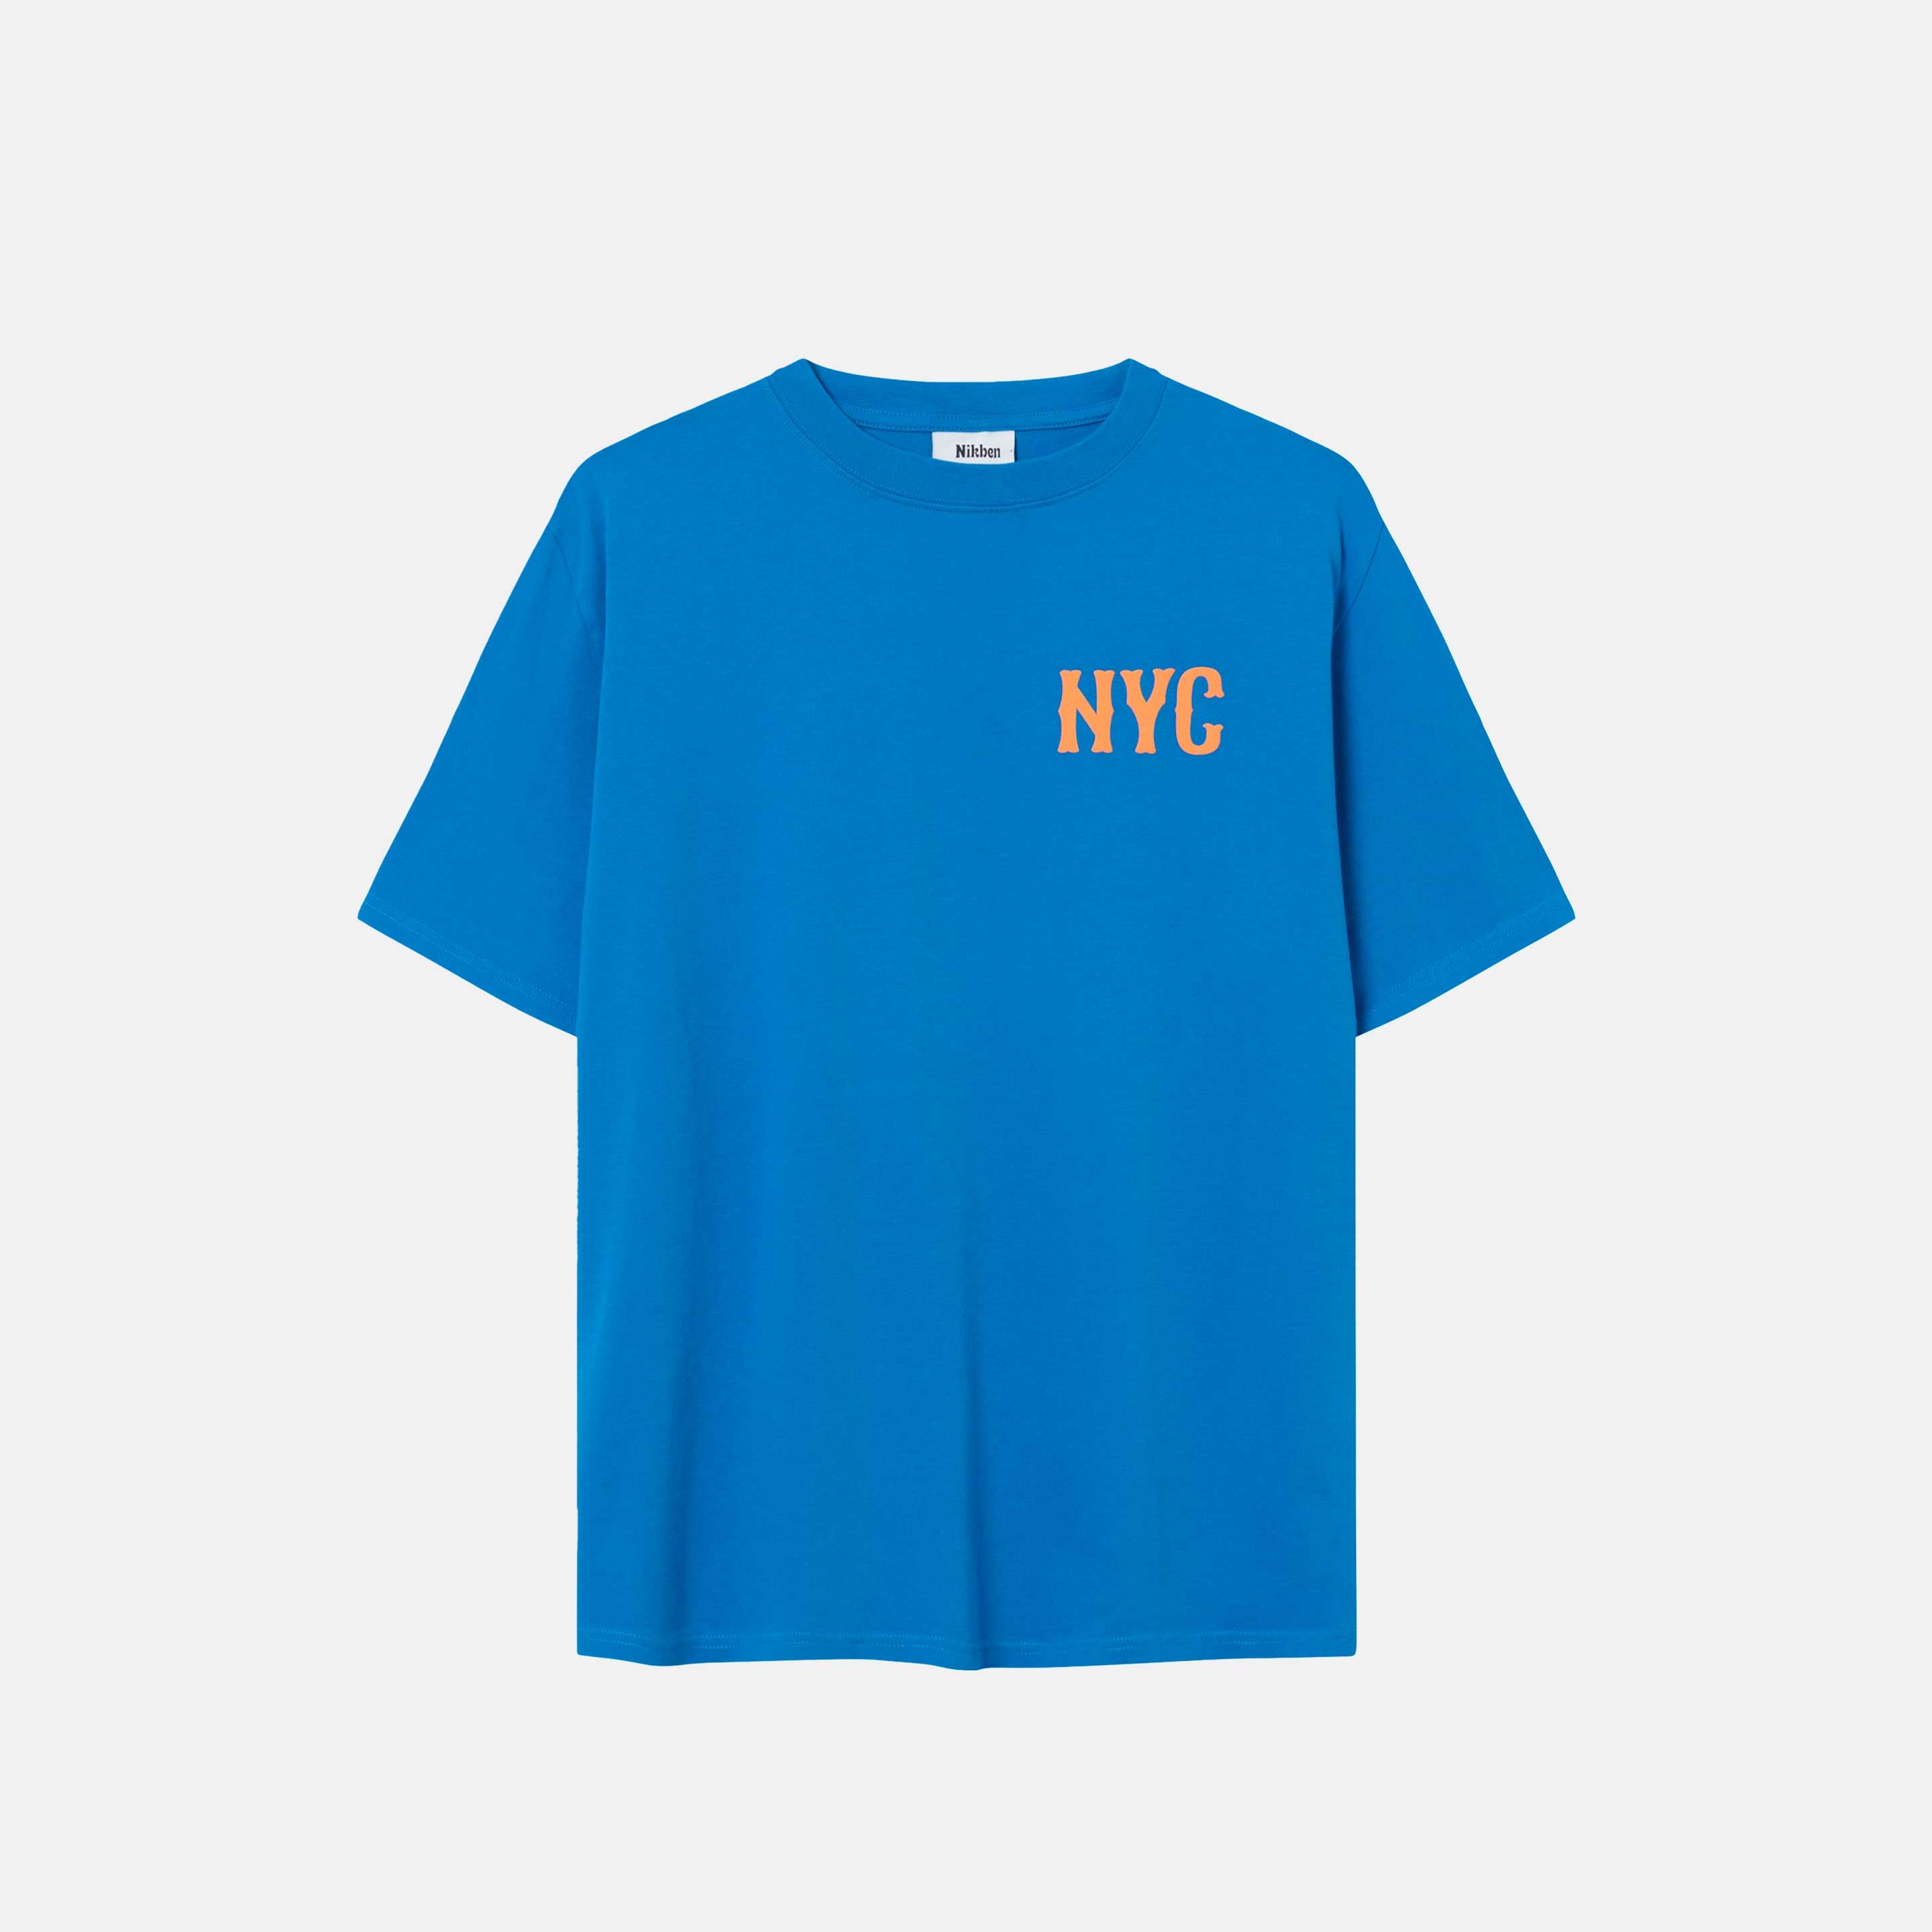 Blue t-shirt with "NYC" chest print in orange letters.